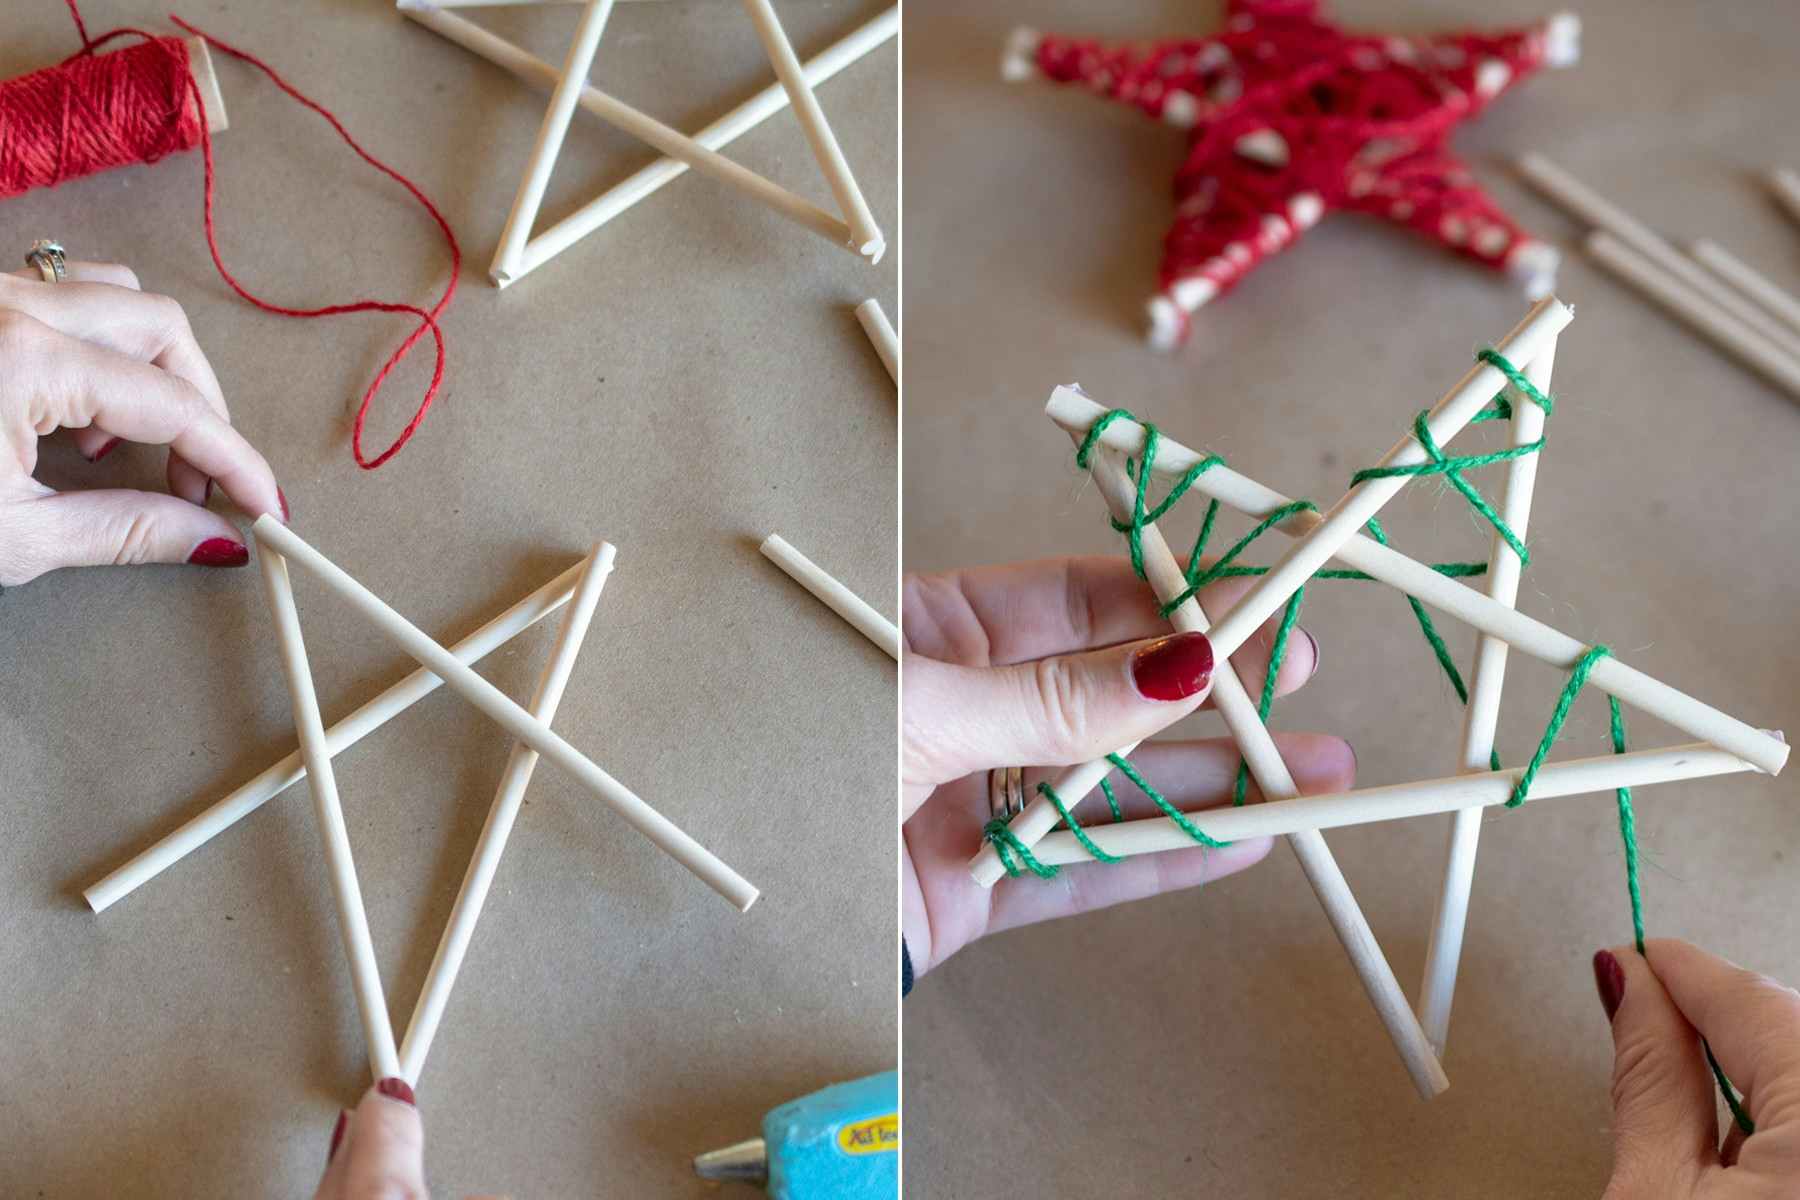 someone gluing wood together to make a star and putting string on it